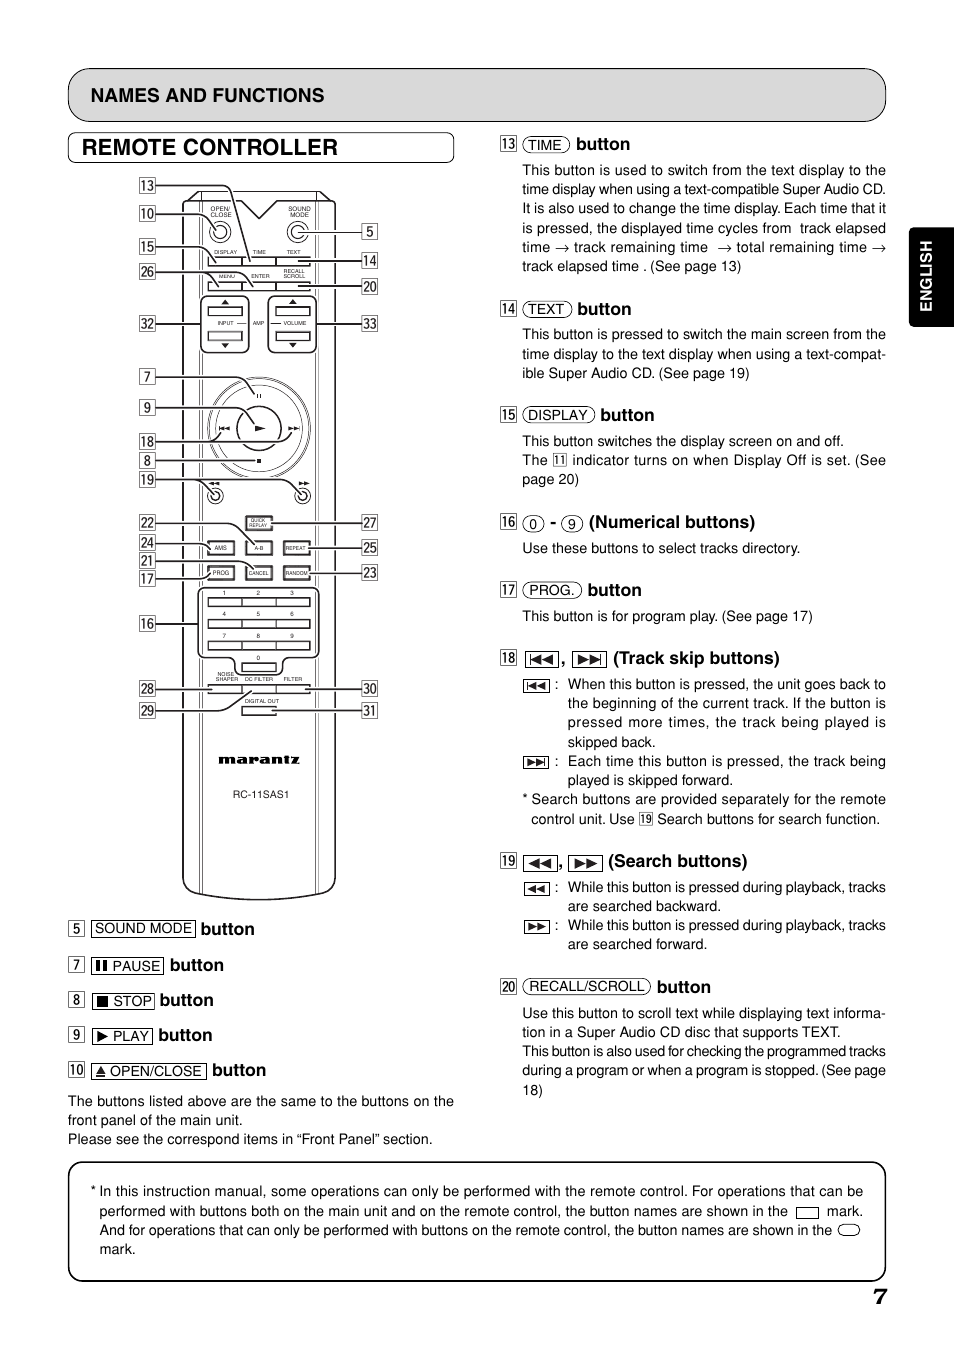 Remote controller, Names and functions, Button m | Button, Button ⁄0, Numerical buttons), 8 , (track skip buttons), 9 , (search buttons) | Marantz SA-11S1 User Manual | Page 12 / 29